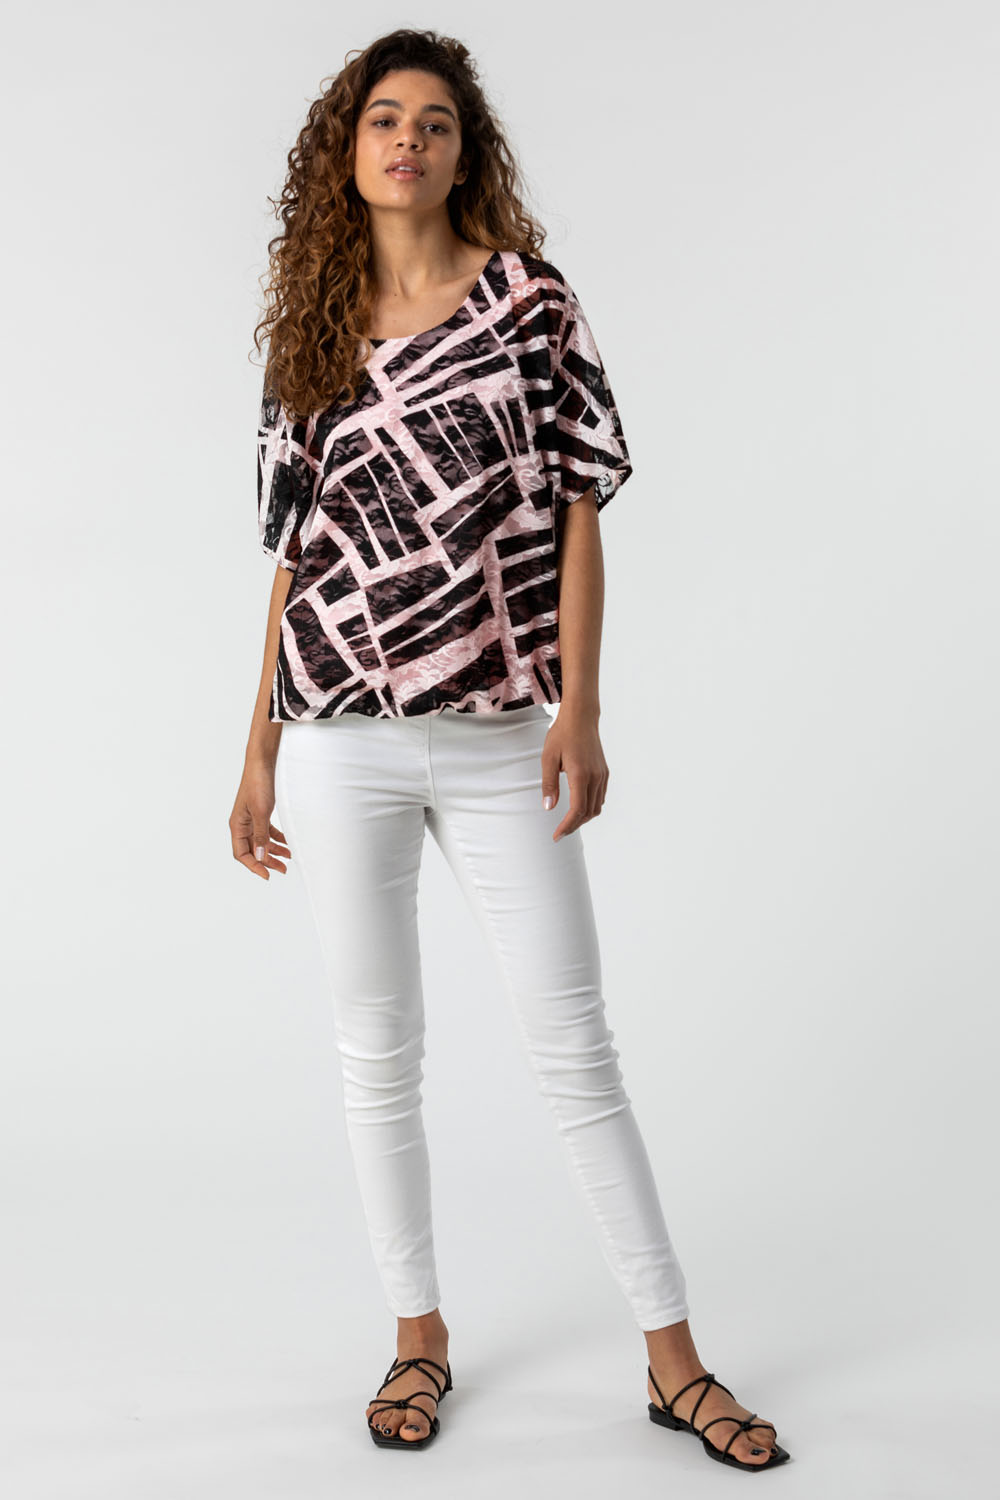 PINK Abstract Print Stretch Jersey Top, Image 3 of 4